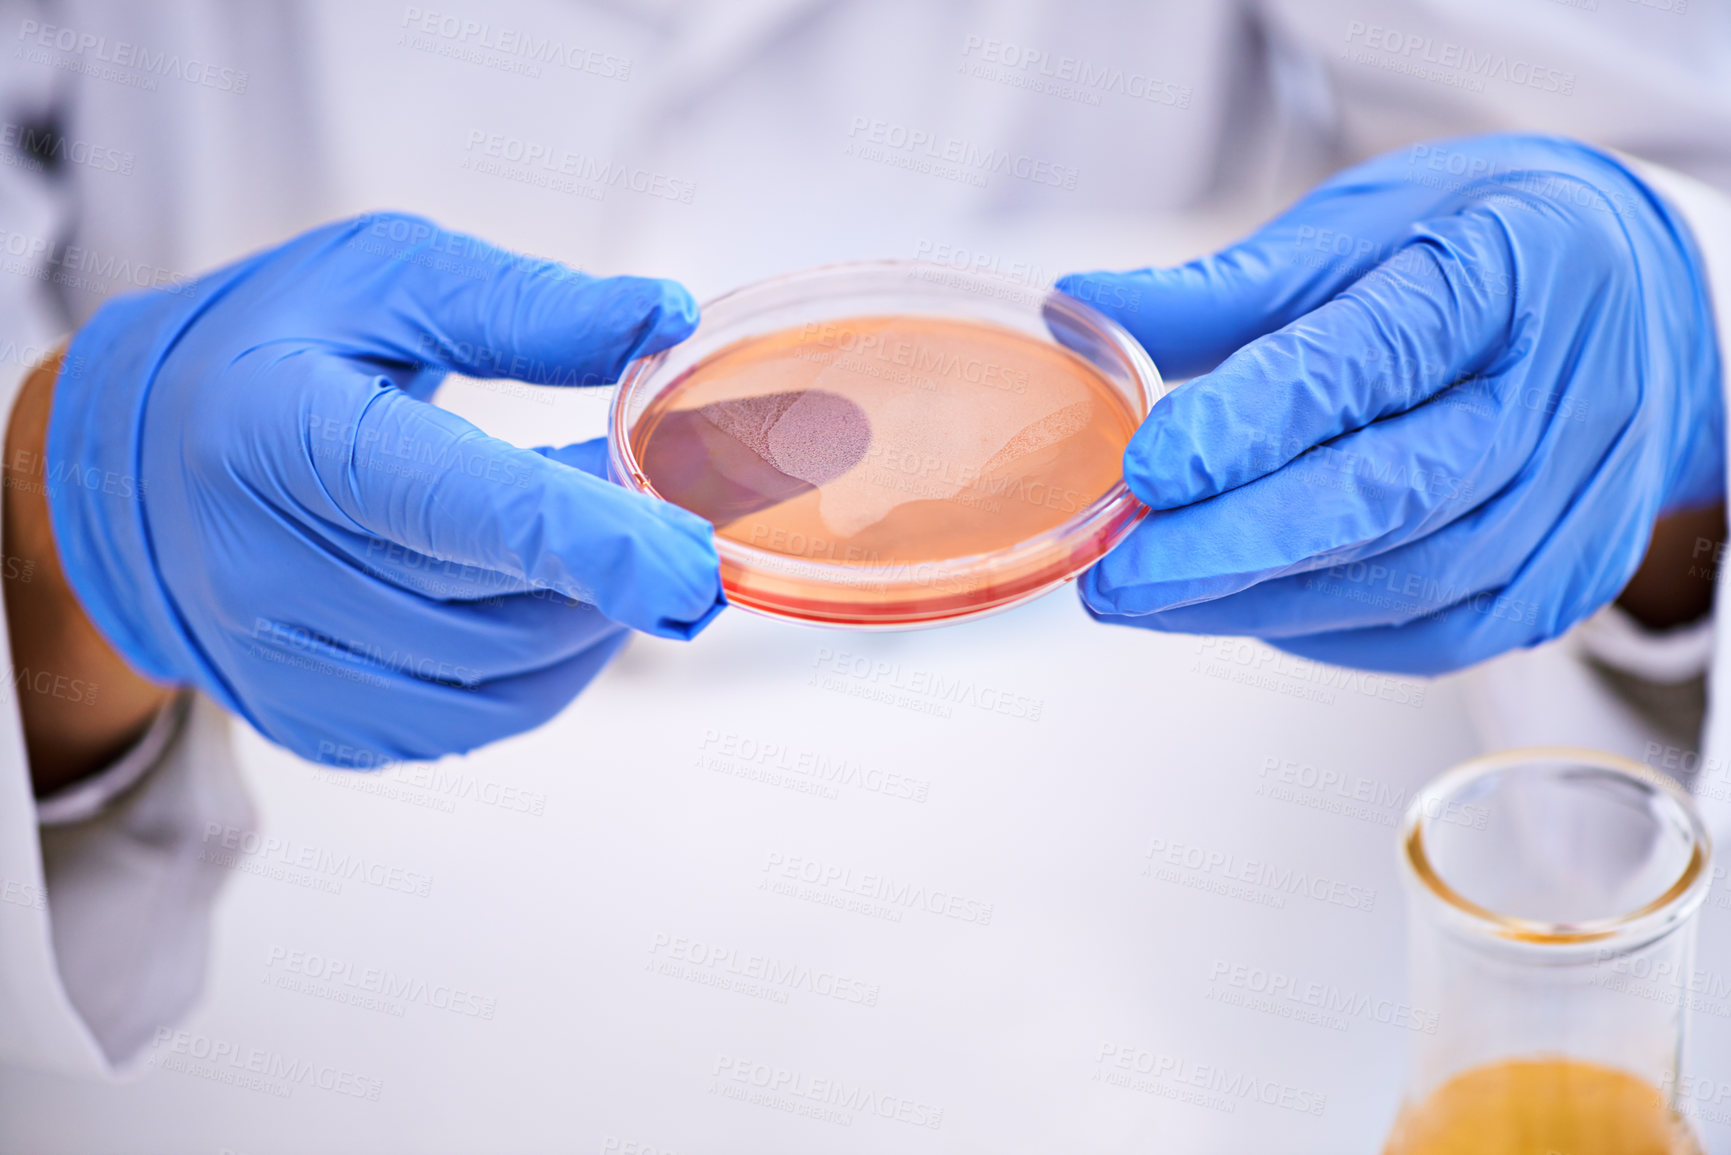 Buy stock photo Closeup shot of a scientist holding a petri dish while conducting an experiment